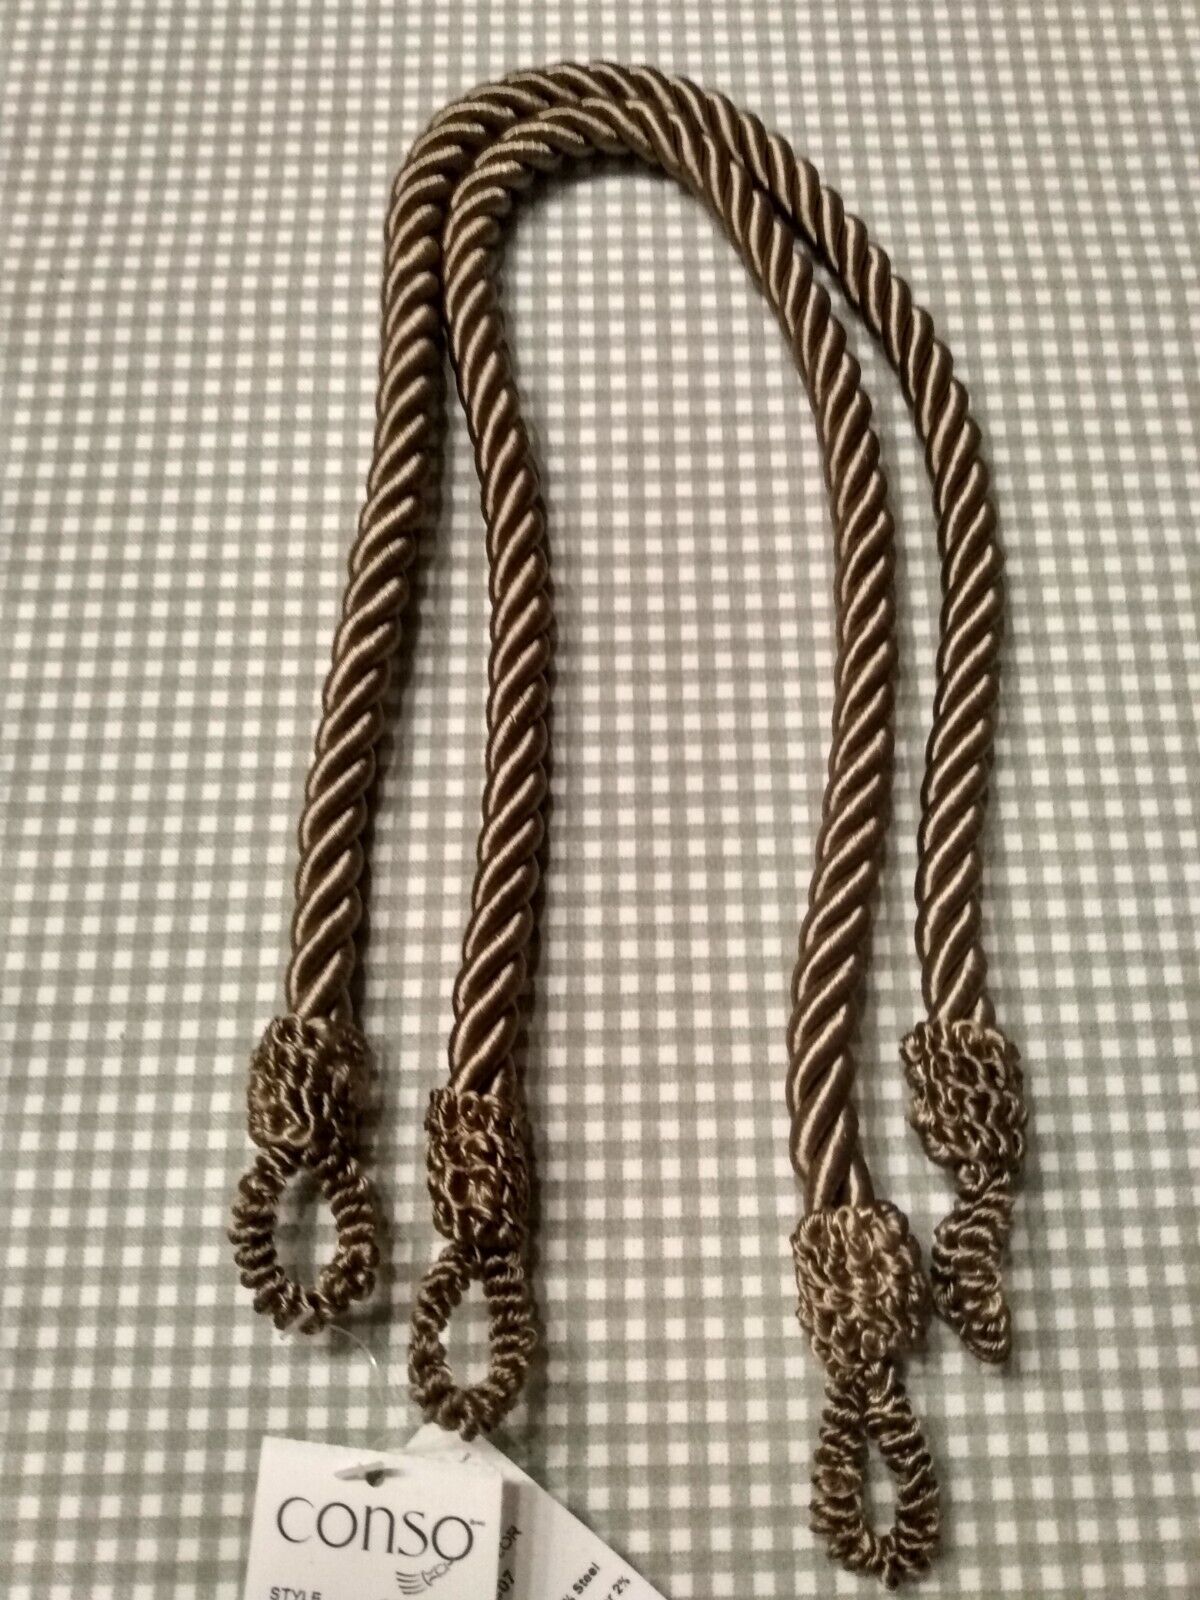 Curtain Tiebacks Drapery Conso Twisted Cord 22 Inches Lot of 2 Bronze Brown New Conso na - фотография #5